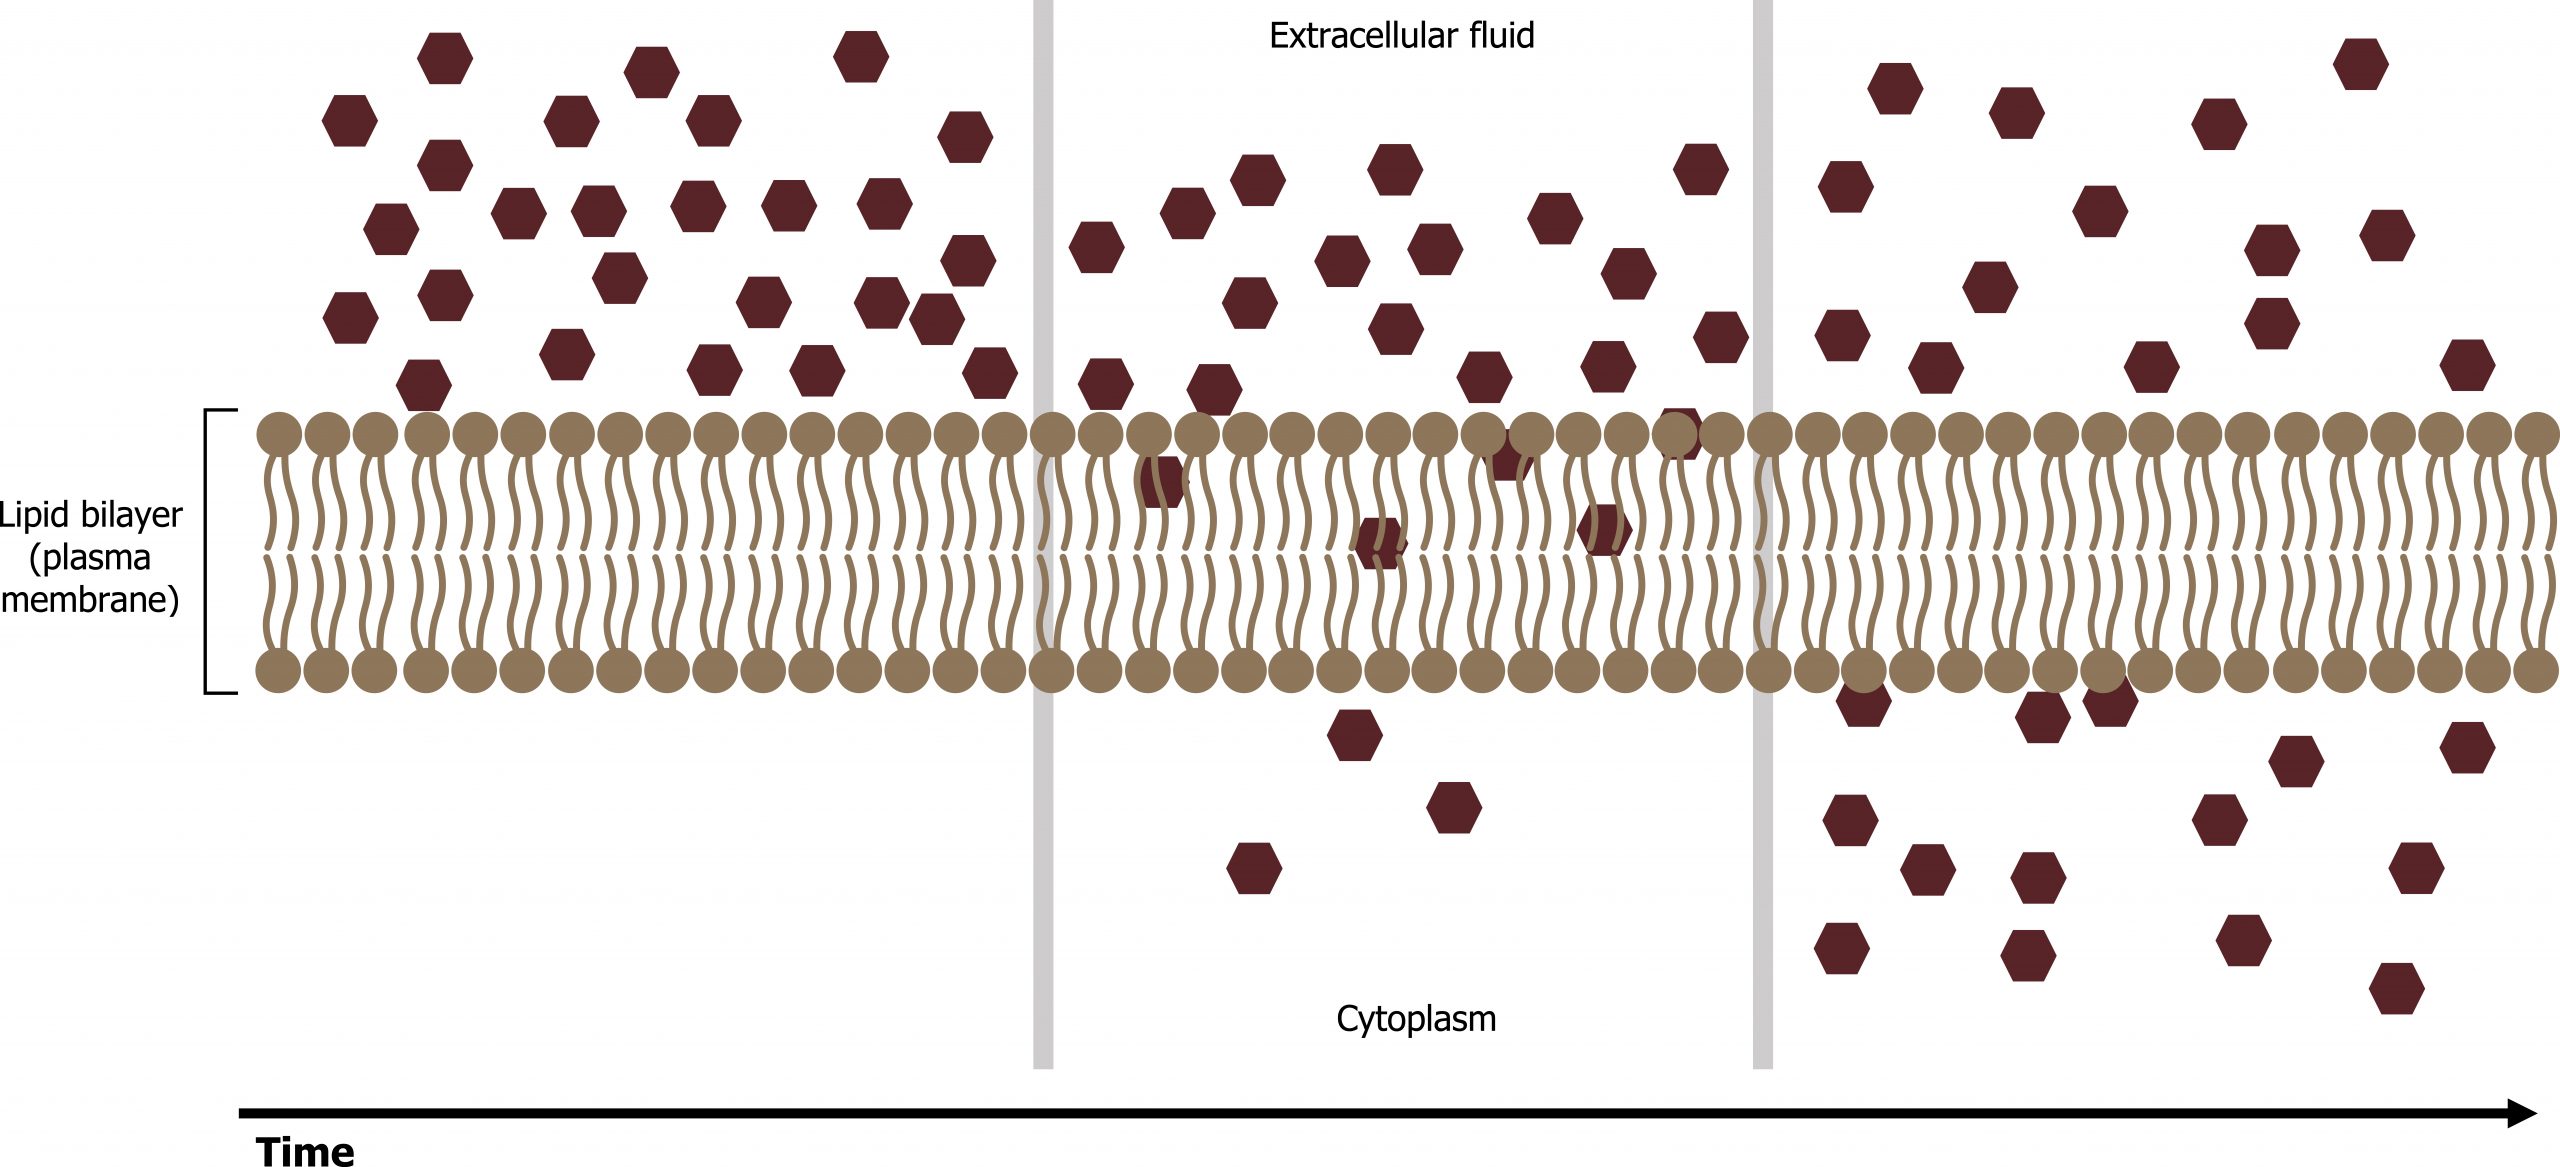 Lipid bilayer (plasma membrane) dividing extracellular fluid (top) from cytoplasm (bottom). At the beginning all particles are on the extracellular side. As time progresses they diffuse across the membrane until there is an equal concentration on both sides of the membrane.